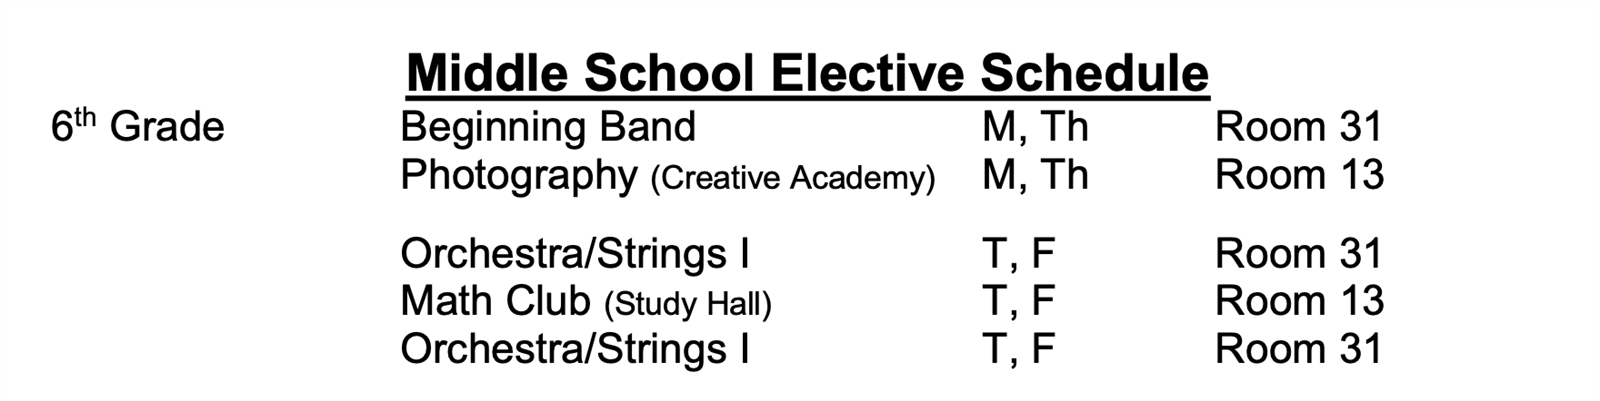 6th Grade Electives Meeting Day Schedule